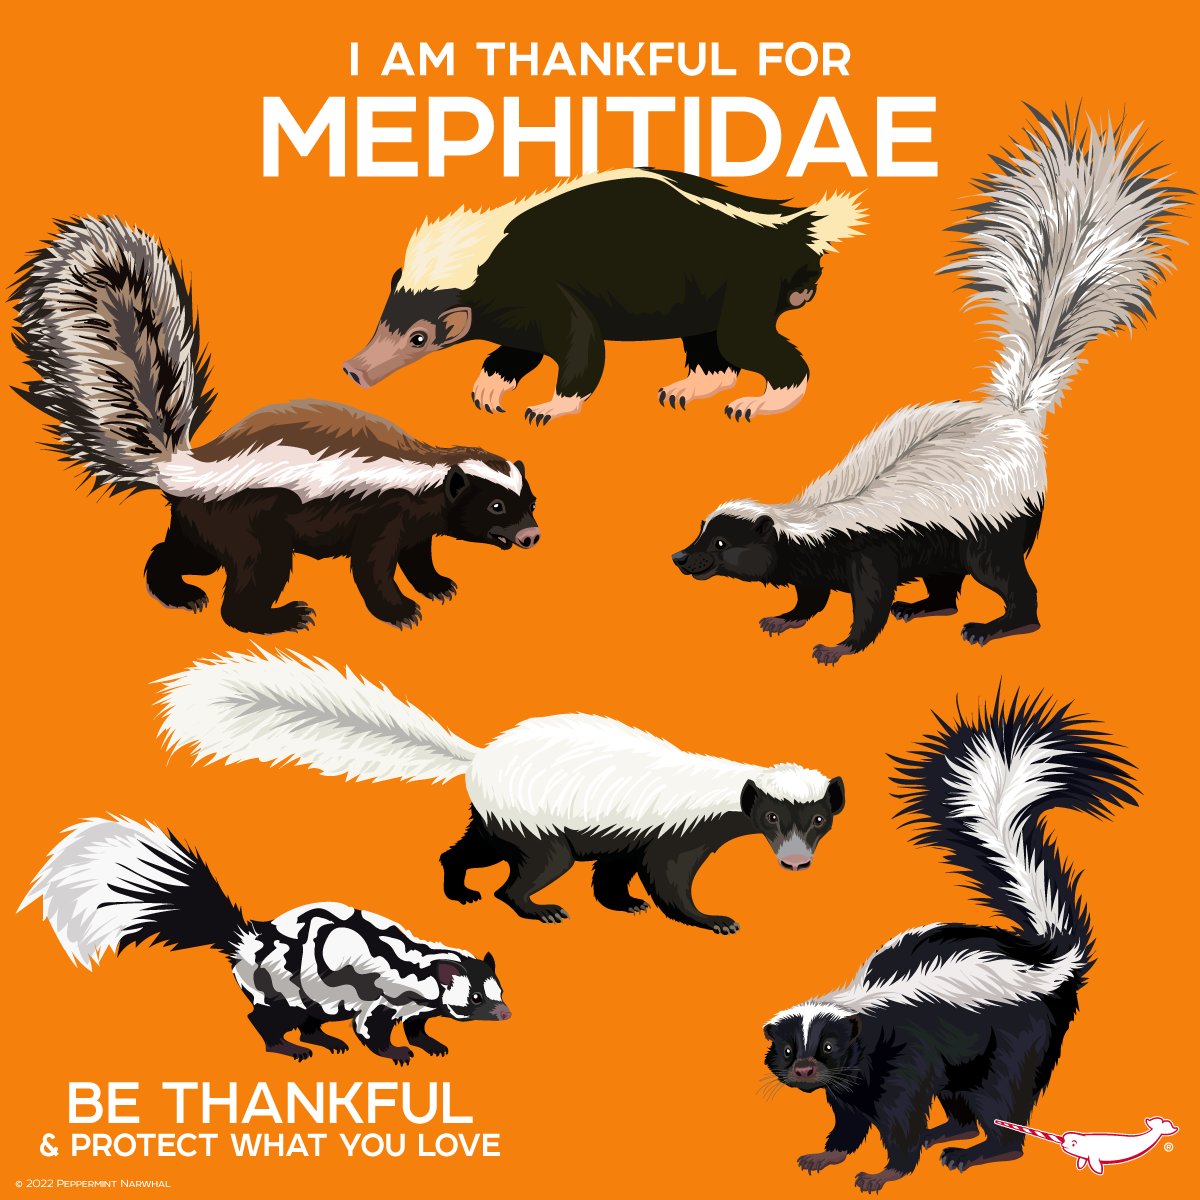 I am #Thankful for #Mephitidae

2023 Calendar available now!
Shop #PeppermintNarwhal at peppermintnarwhal.com

#Thanksgiving #Thanksgiving2021 #BeThankful